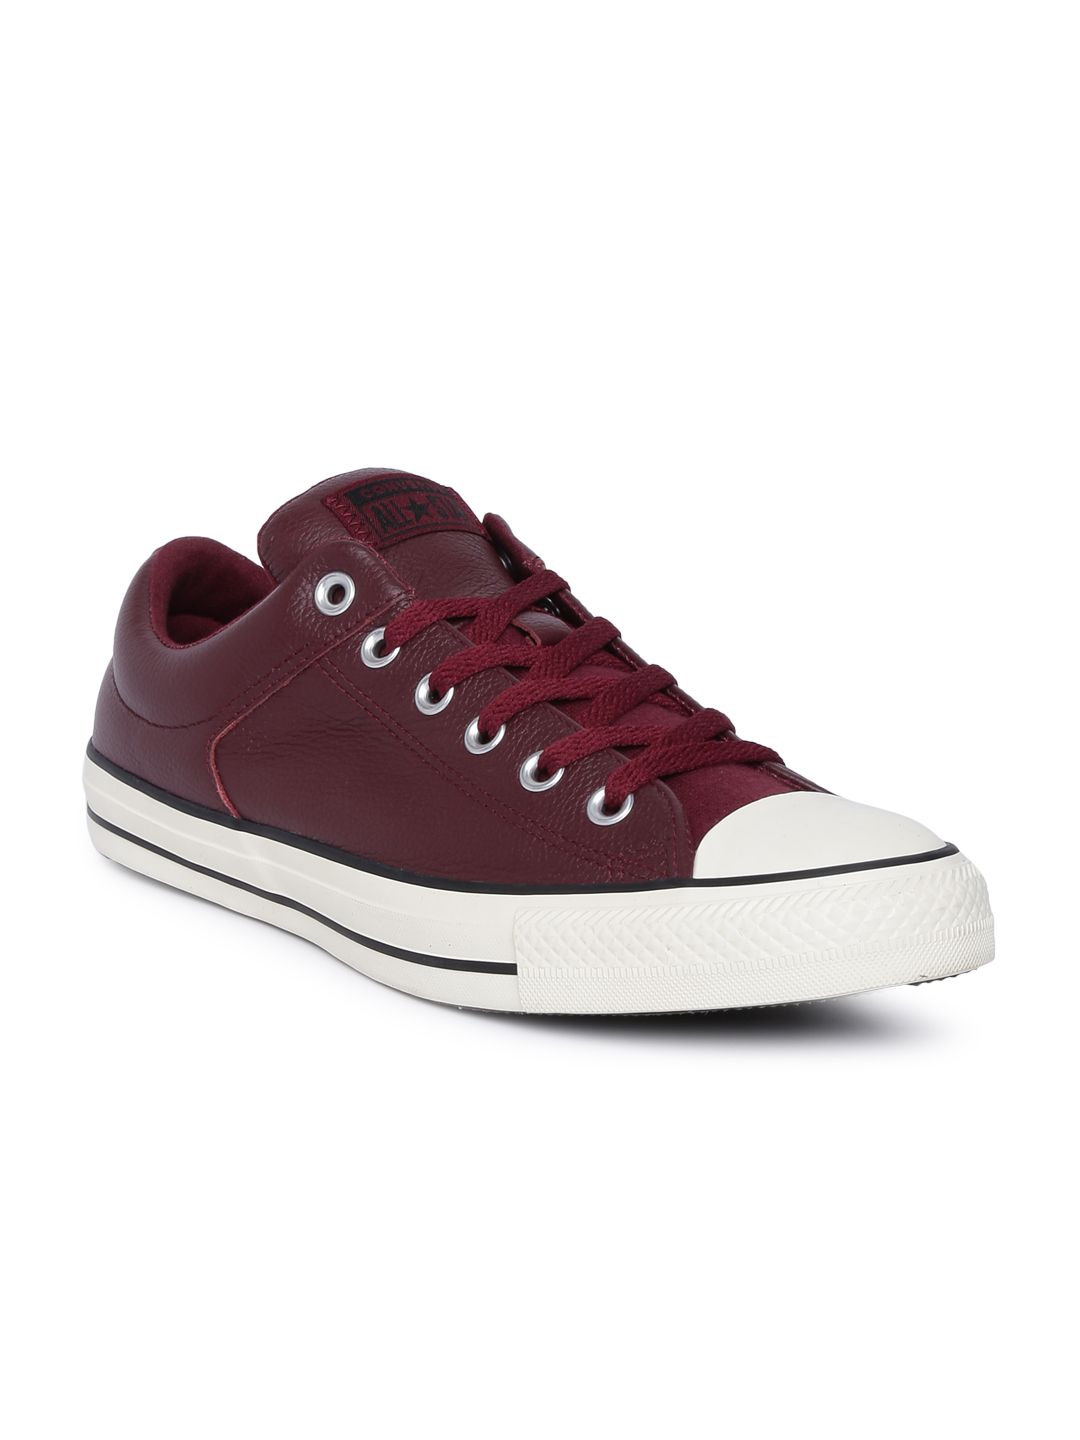 maroon leather converse